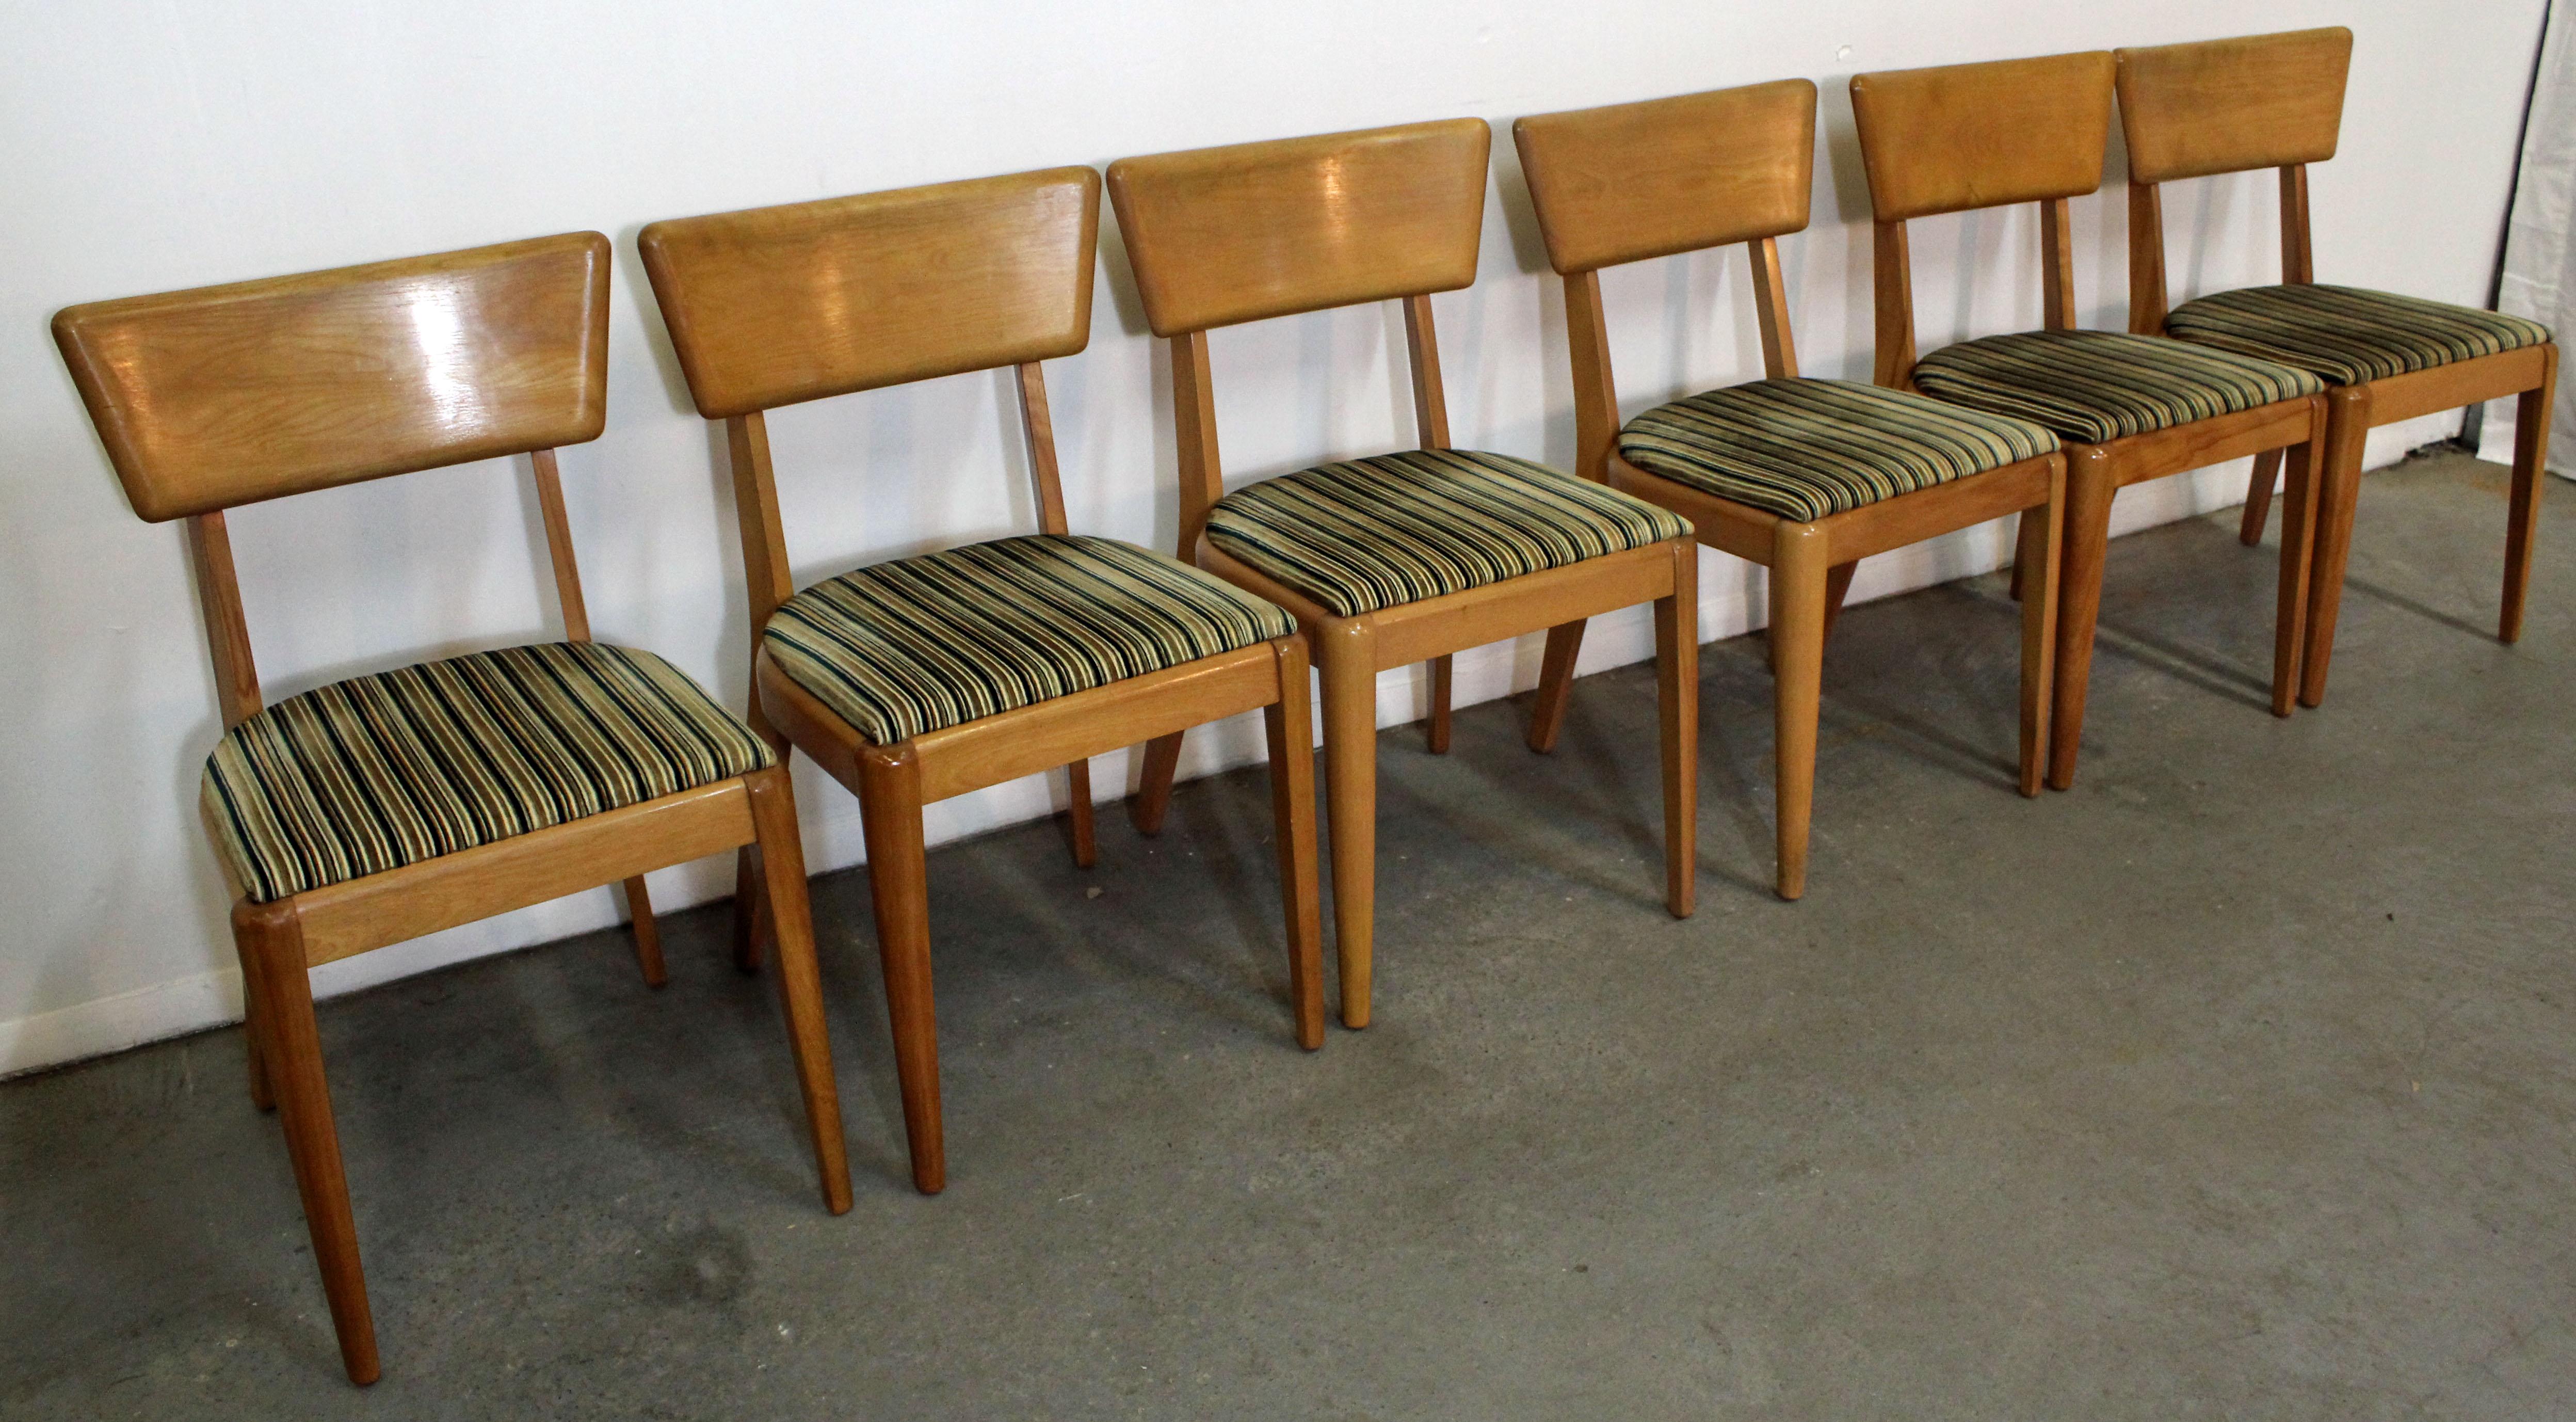 What a find. Offered is a set of 6 dining chairs by Heywood-Wakefield. This set is made of birch with a champagne finish. They are in good condition for their age, shows some wear. They are marked by Heywood-Wakefield.

Approximate